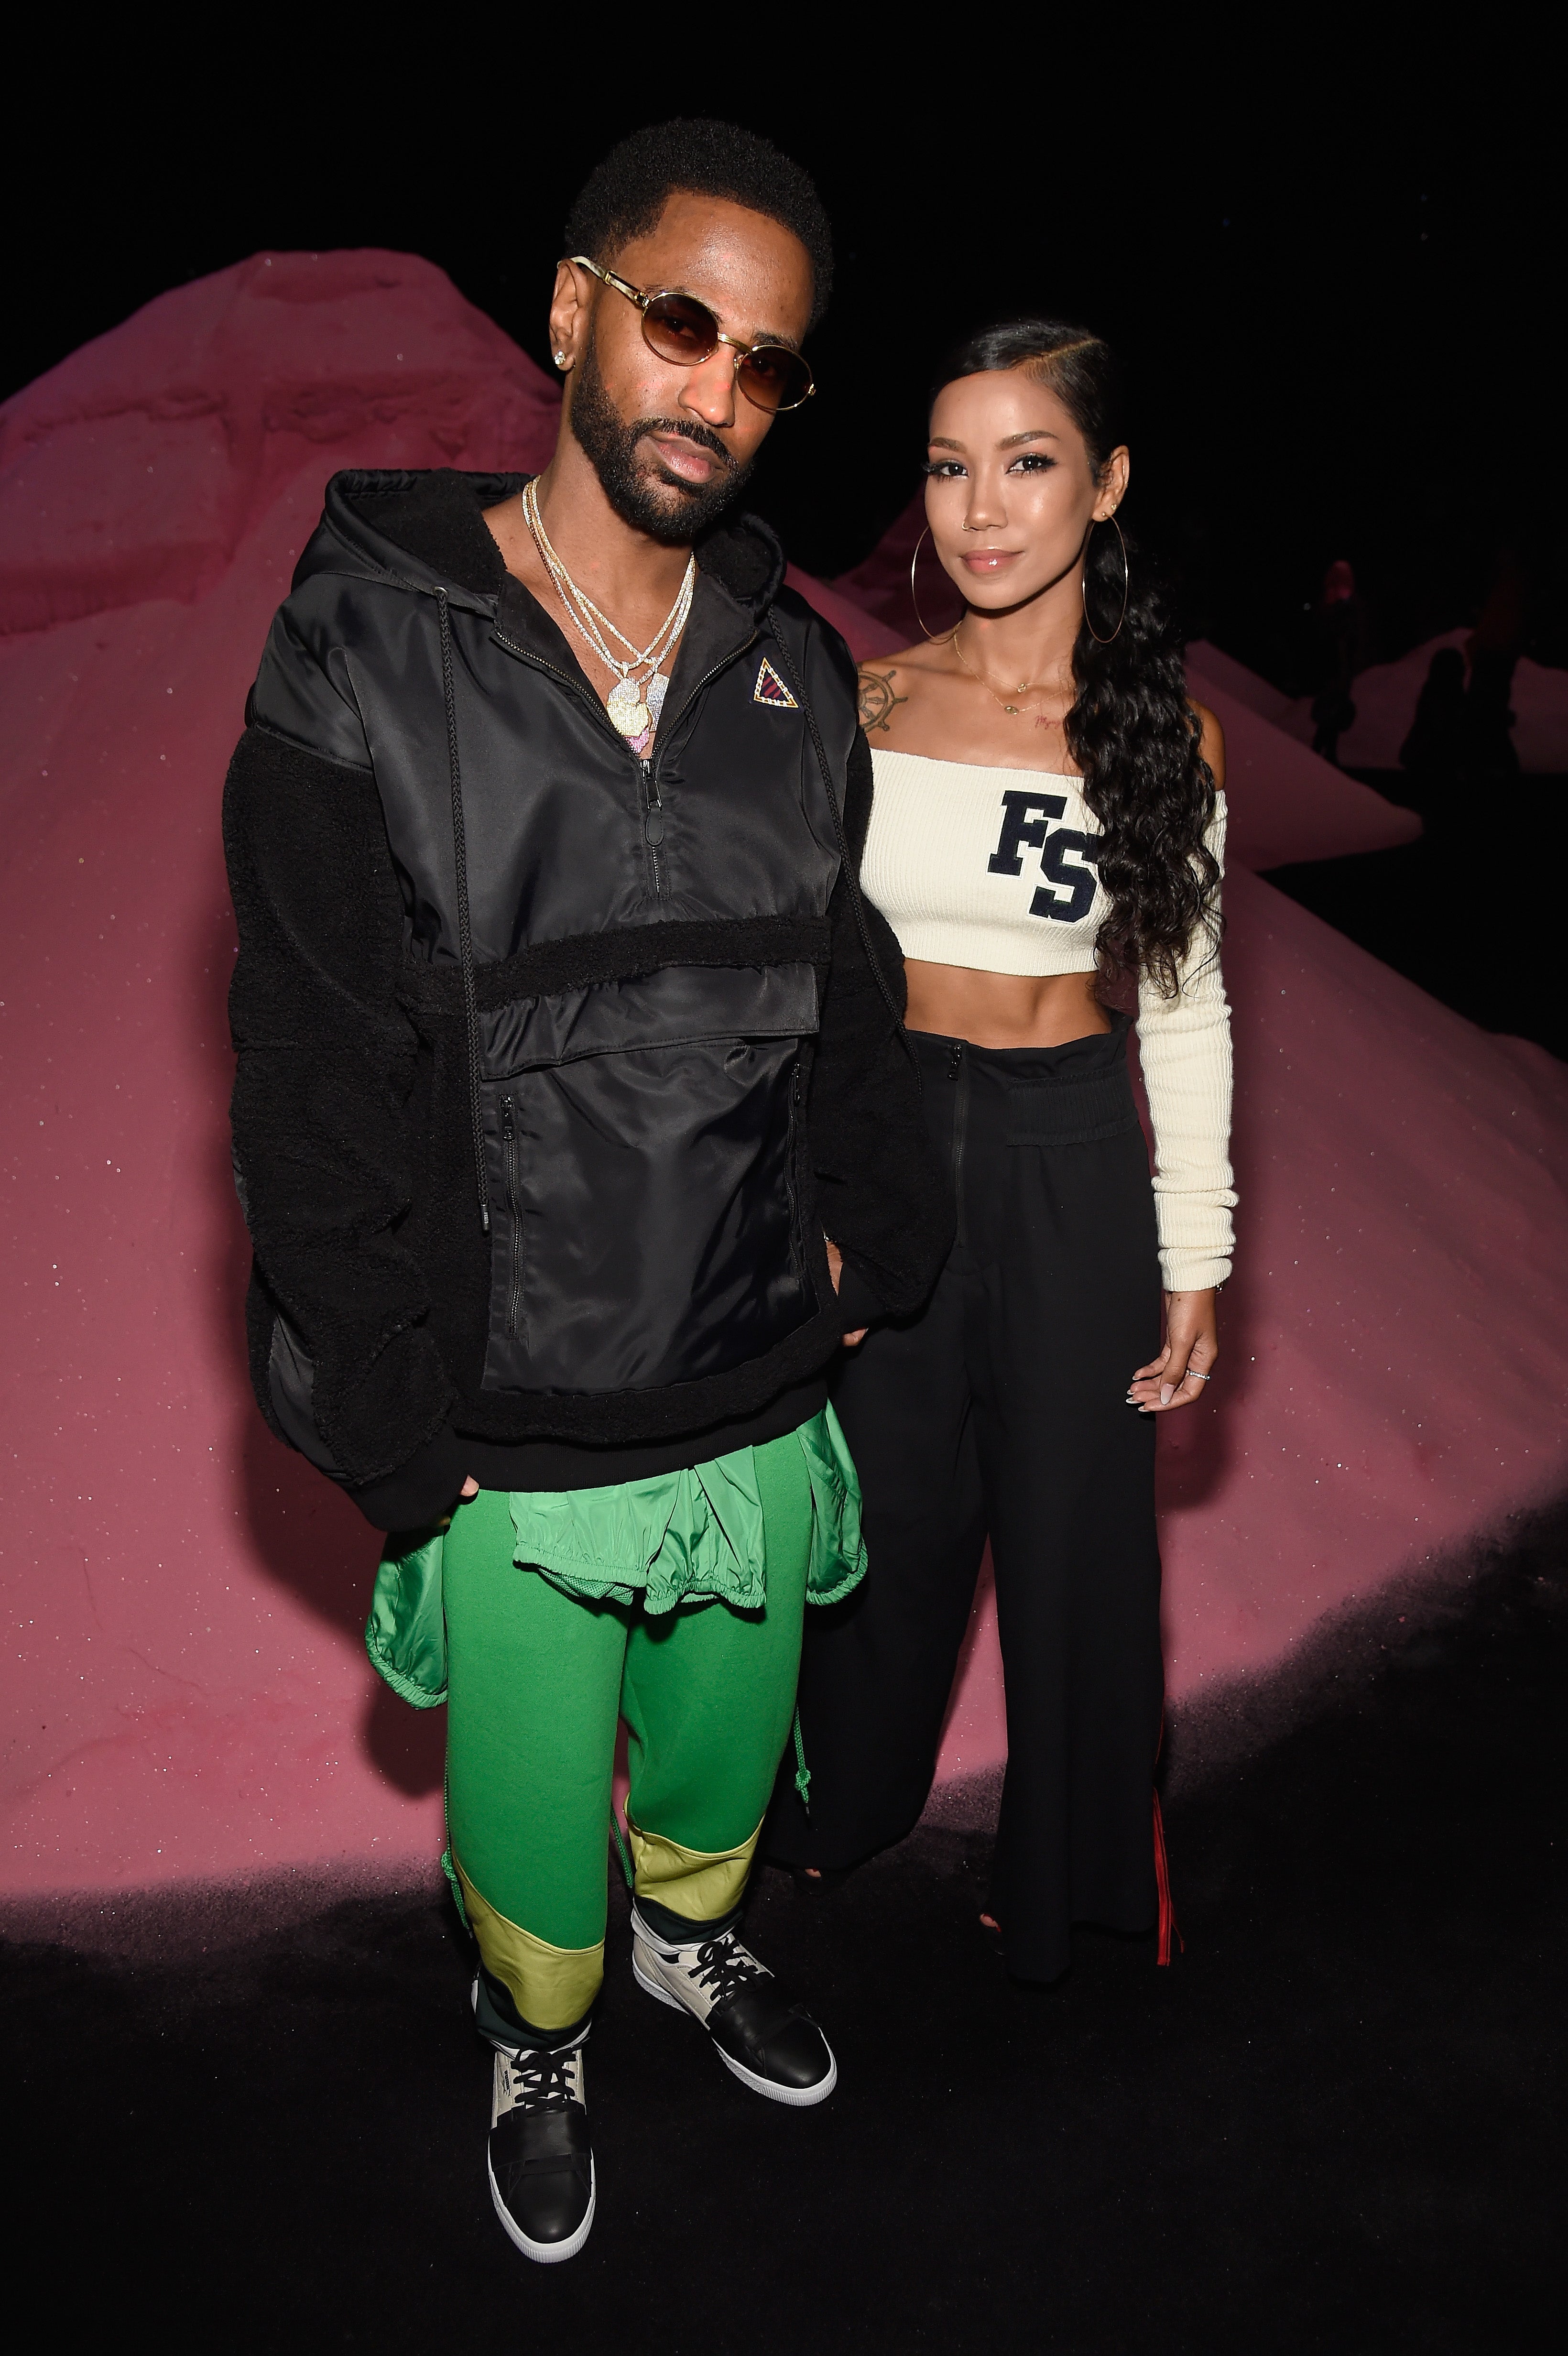 The Internet Got It Wrong About Jhene Aiko and Big Sean: She Says The Breakup Rumors Are 'Fiction'